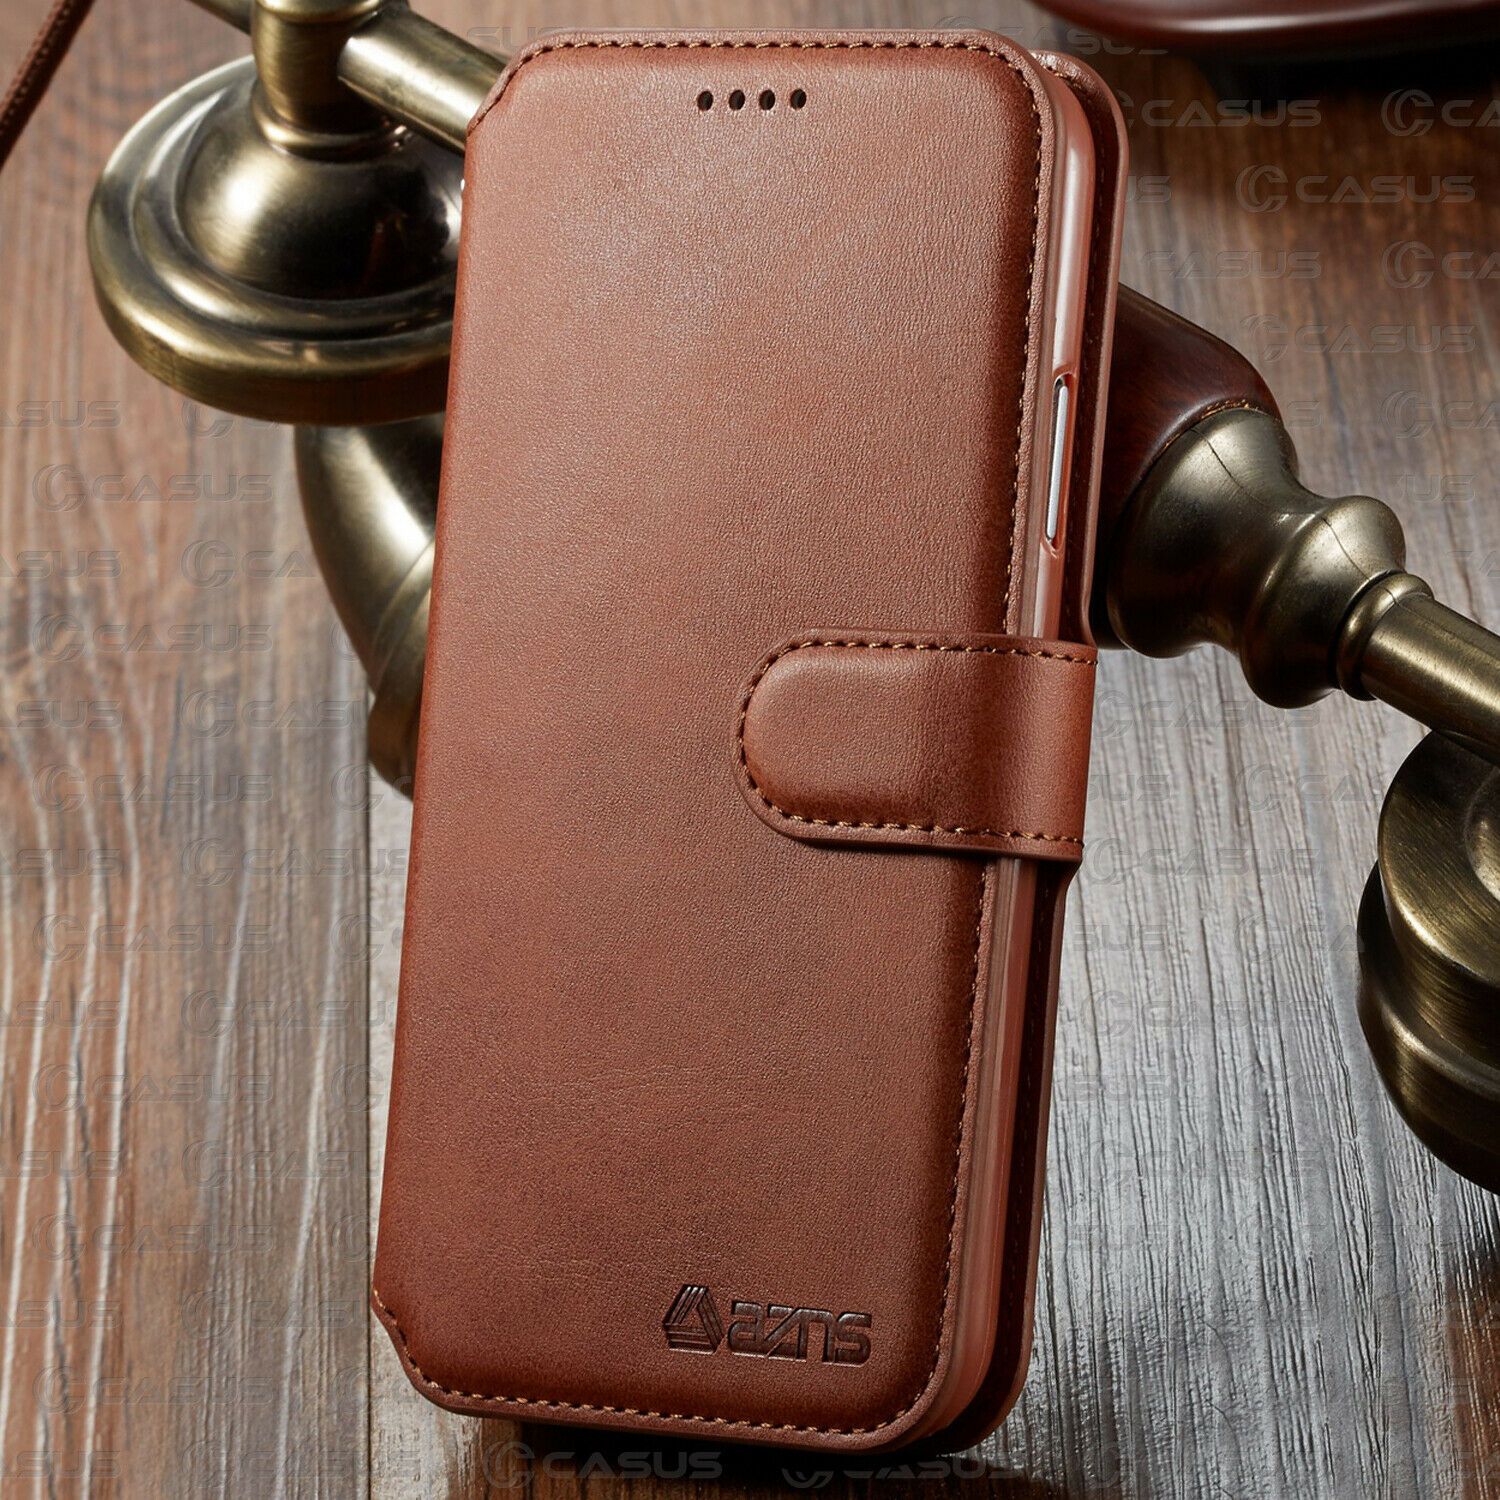 Leather Wallet Flip Card Holder Cover Case For iPhone 11 PRO MAX XR XS 8/6 Plus casuscasescasuscases For Apple iPhone 11 Brown 